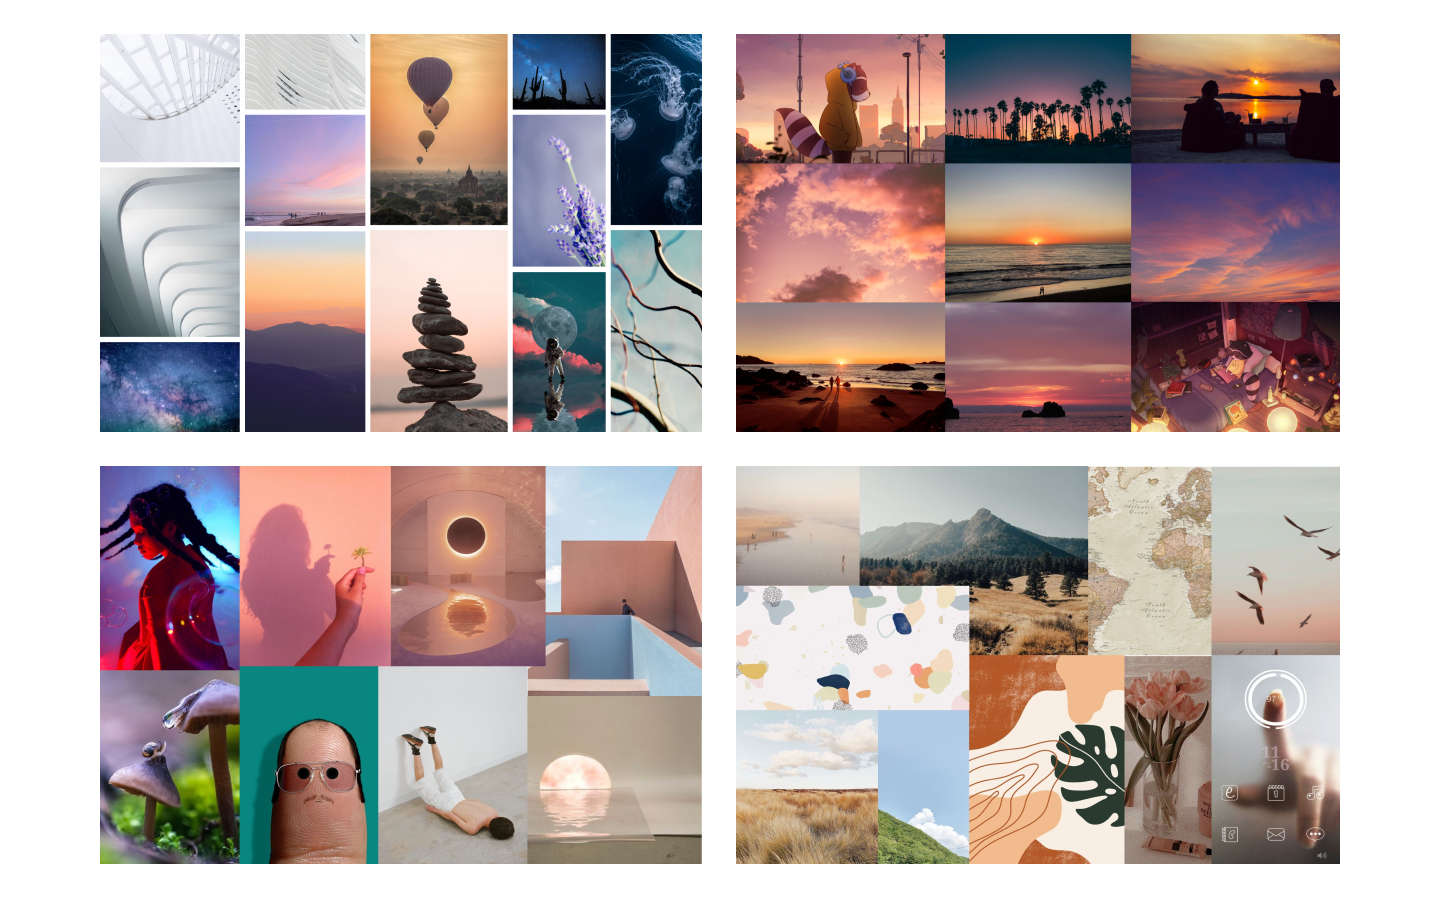 4 moodboards that convey feelings of warmth, comfort, and modernness